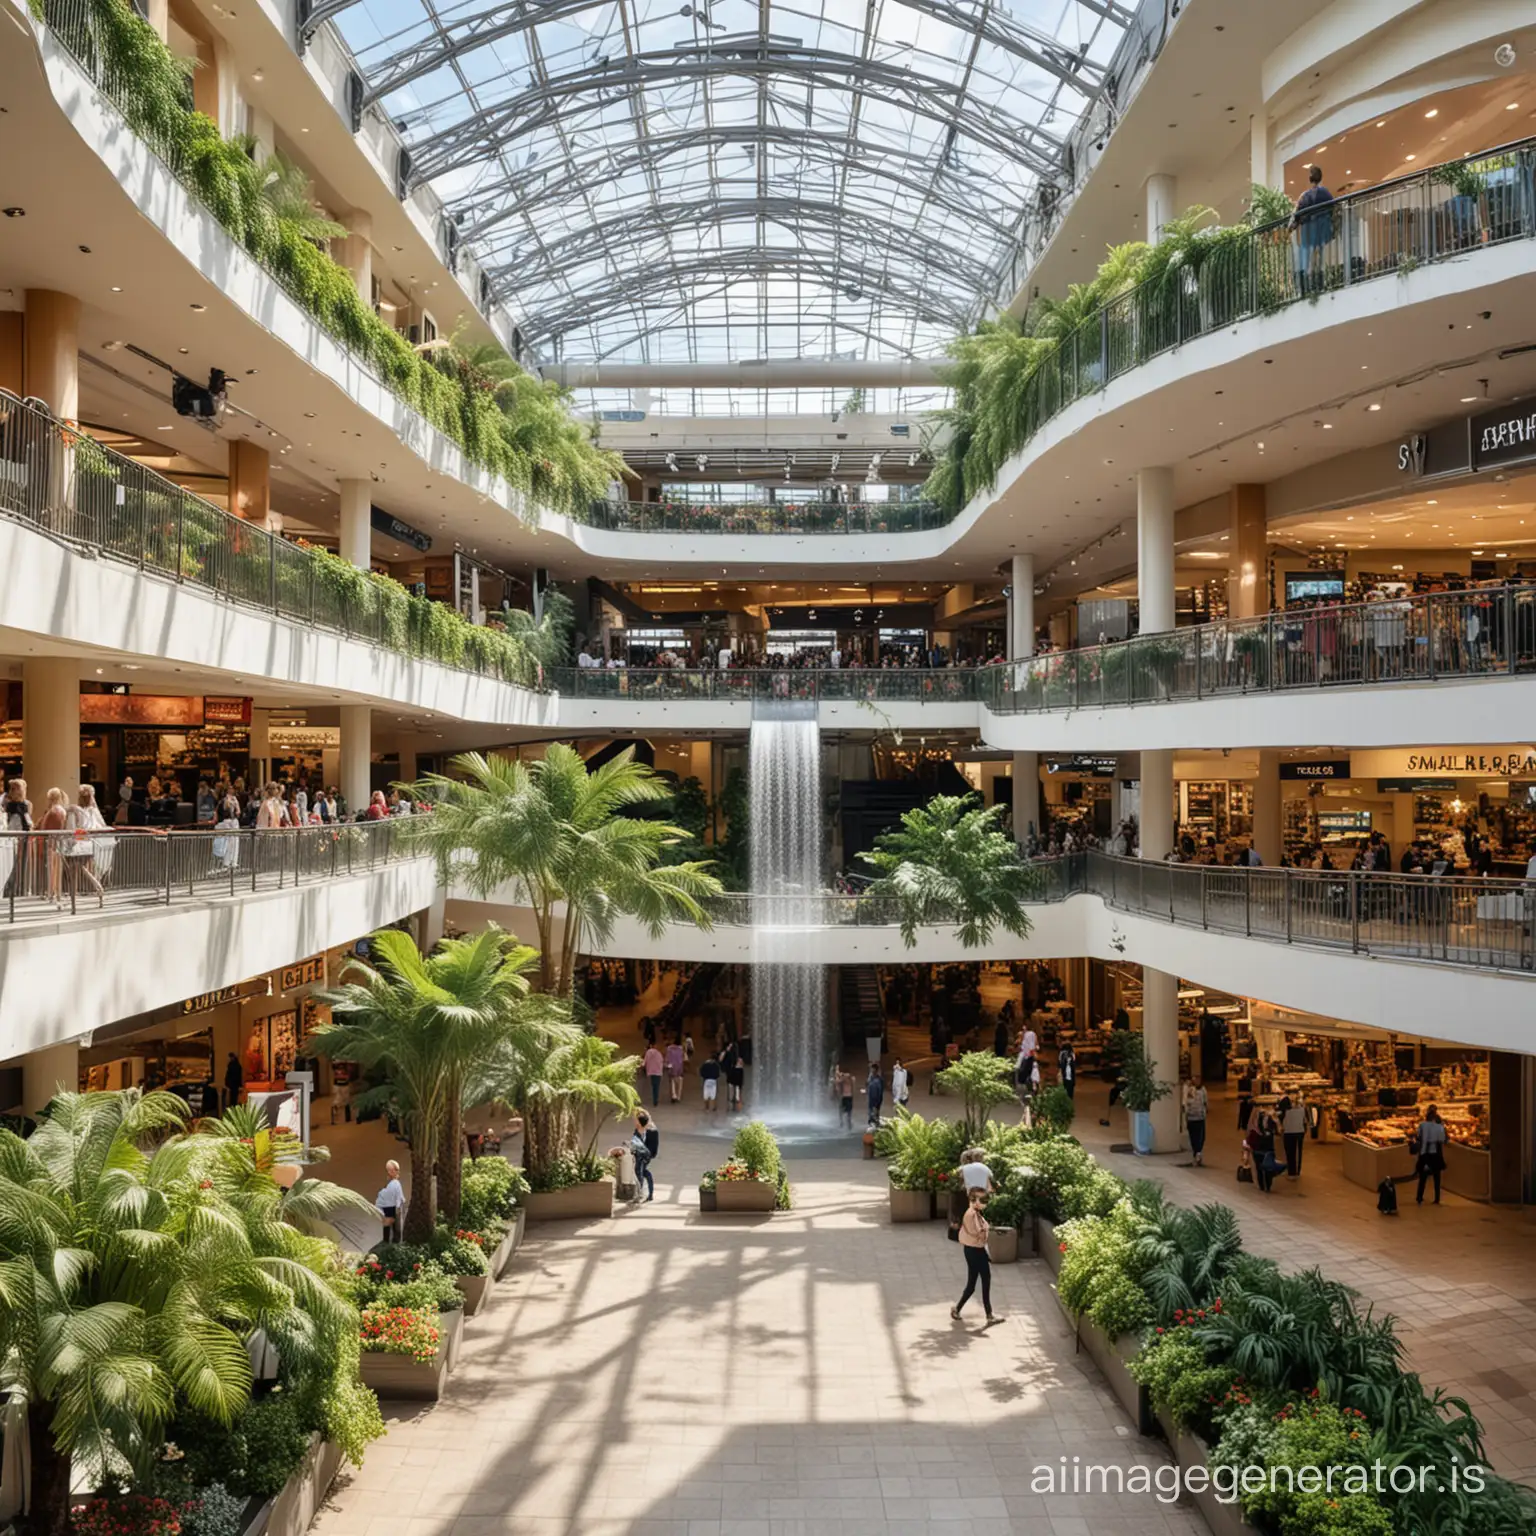 Bustling-TwoStory-Shopping-Center-with-Garden-and-Waterfall